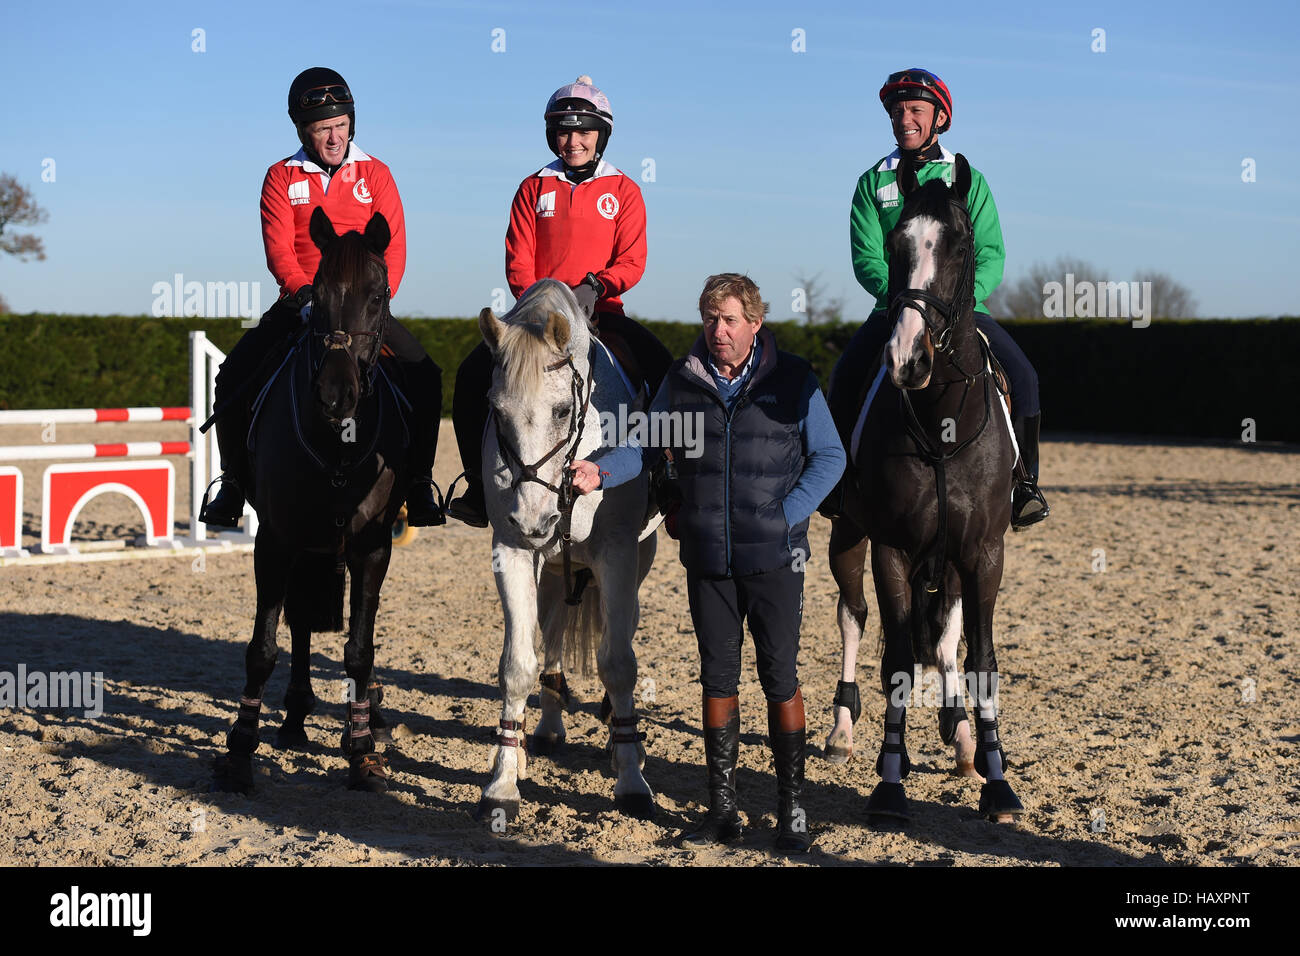 (From left to right) AP McCoy, Victoria Pendleton and Frankie Dettori during a lesson in showjumping with Olympic gold medallist Nick Skelton at his Ardencote Farm stables in Warwickshire. PRESS ASSOCIATION Photo. Issue date: Saturday December 3, 2016. Frankie Dettori and Victoria Pendleton will compete in The Markel Champions Challenge in aid of the Injured Jockeys Fund at the Olympia London in December. Photo credit should read: Joe Giddens/PA Wire Stock Photo